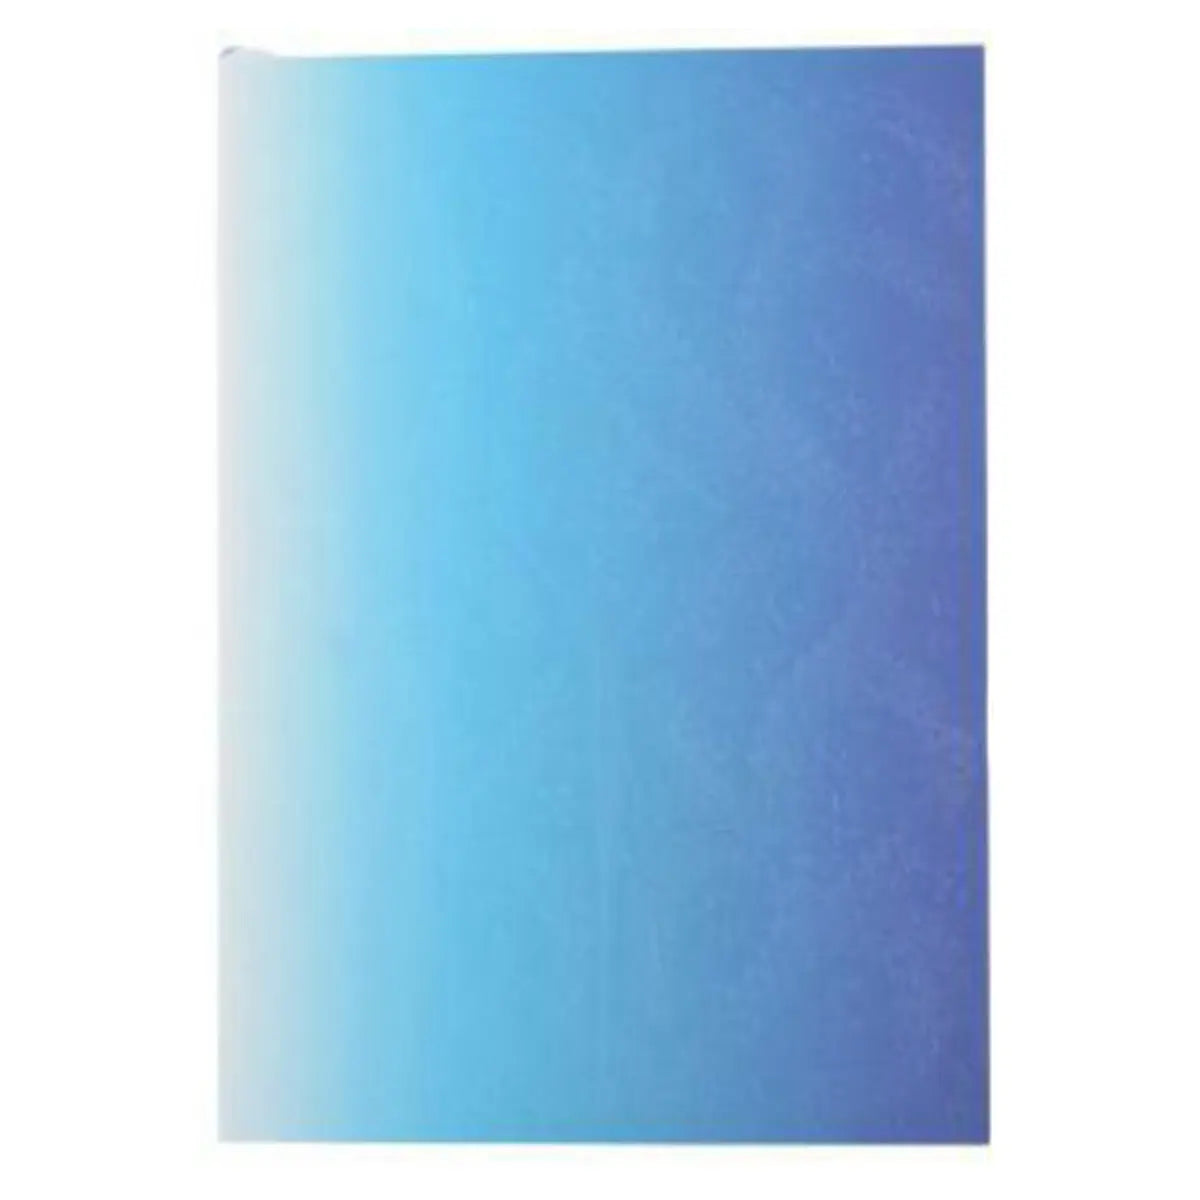 Hachette Christian Lacroix Ombre Paseo Notebook in Neon Blue